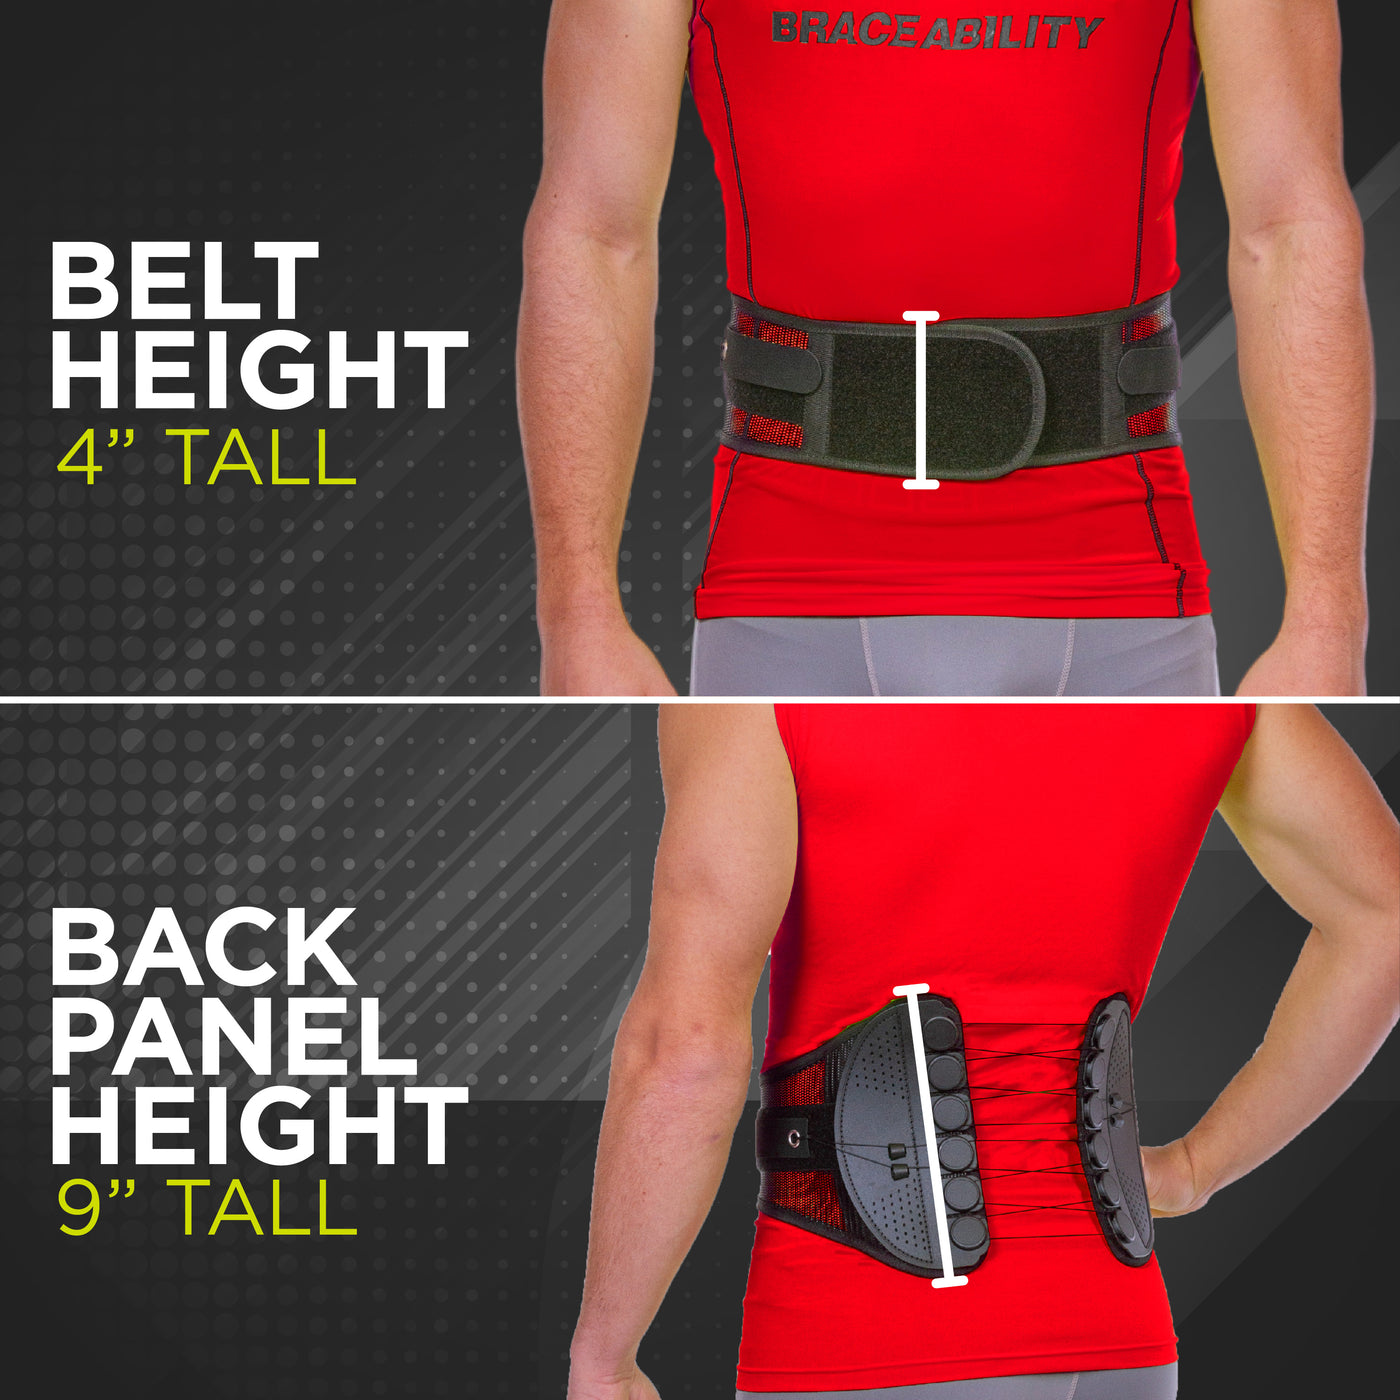 Sports back brace for lumbar support is not bulky and comfortable to wear